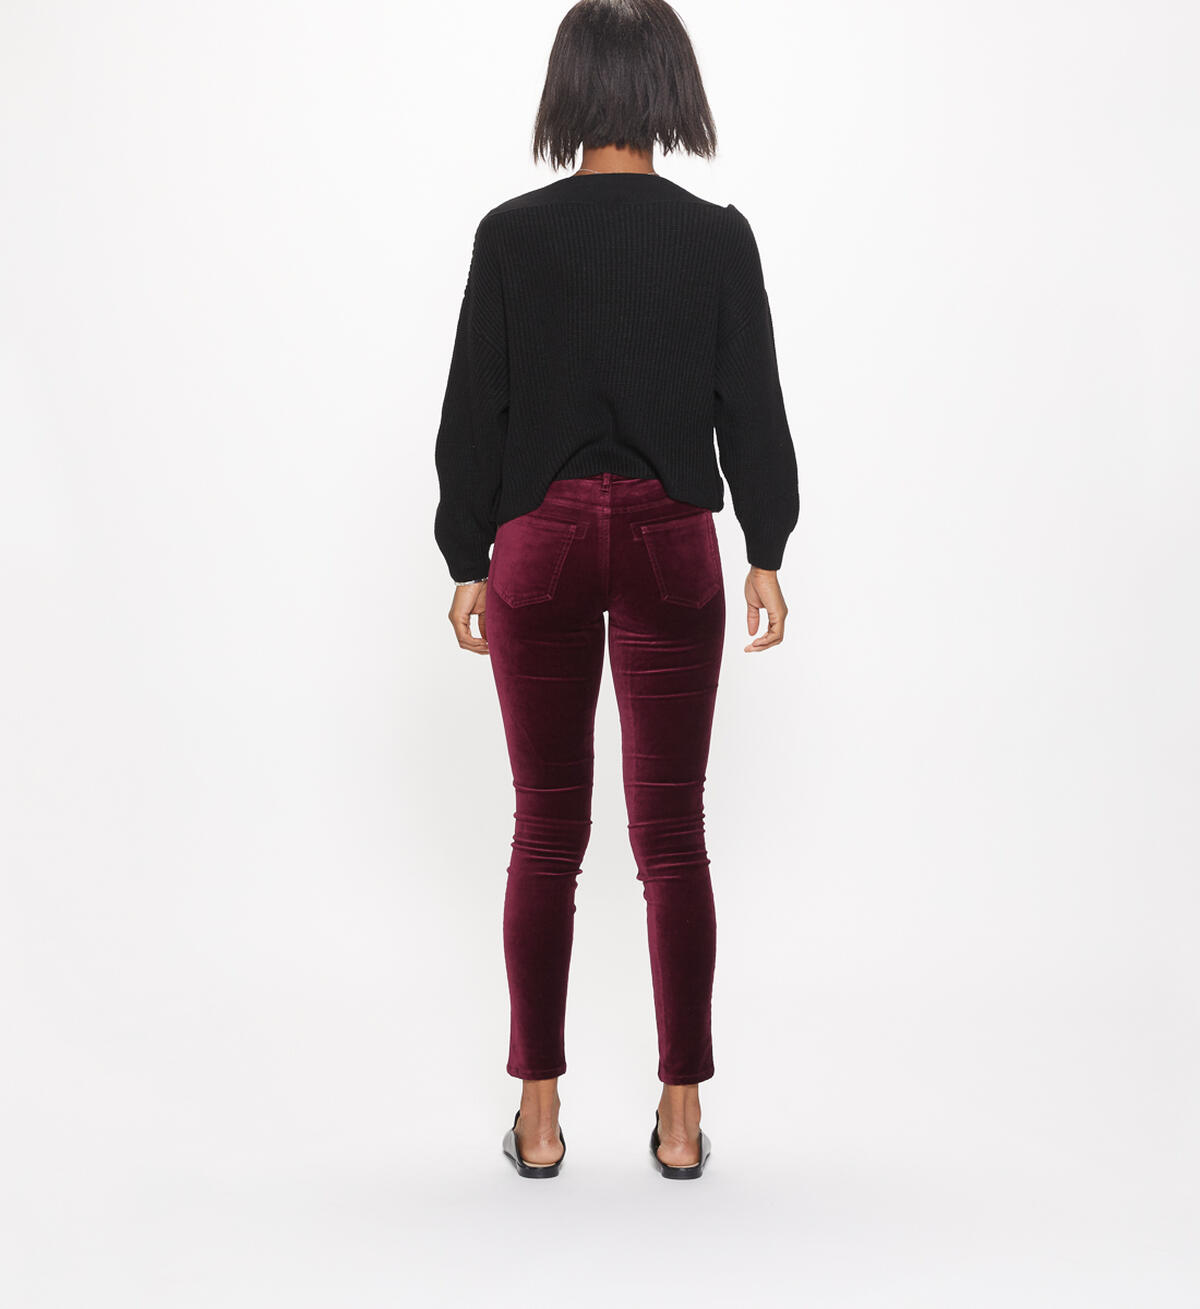 Aiko Mid Rise Skinny Leg Pants Final Sale, Cherry, hi-res image number 1